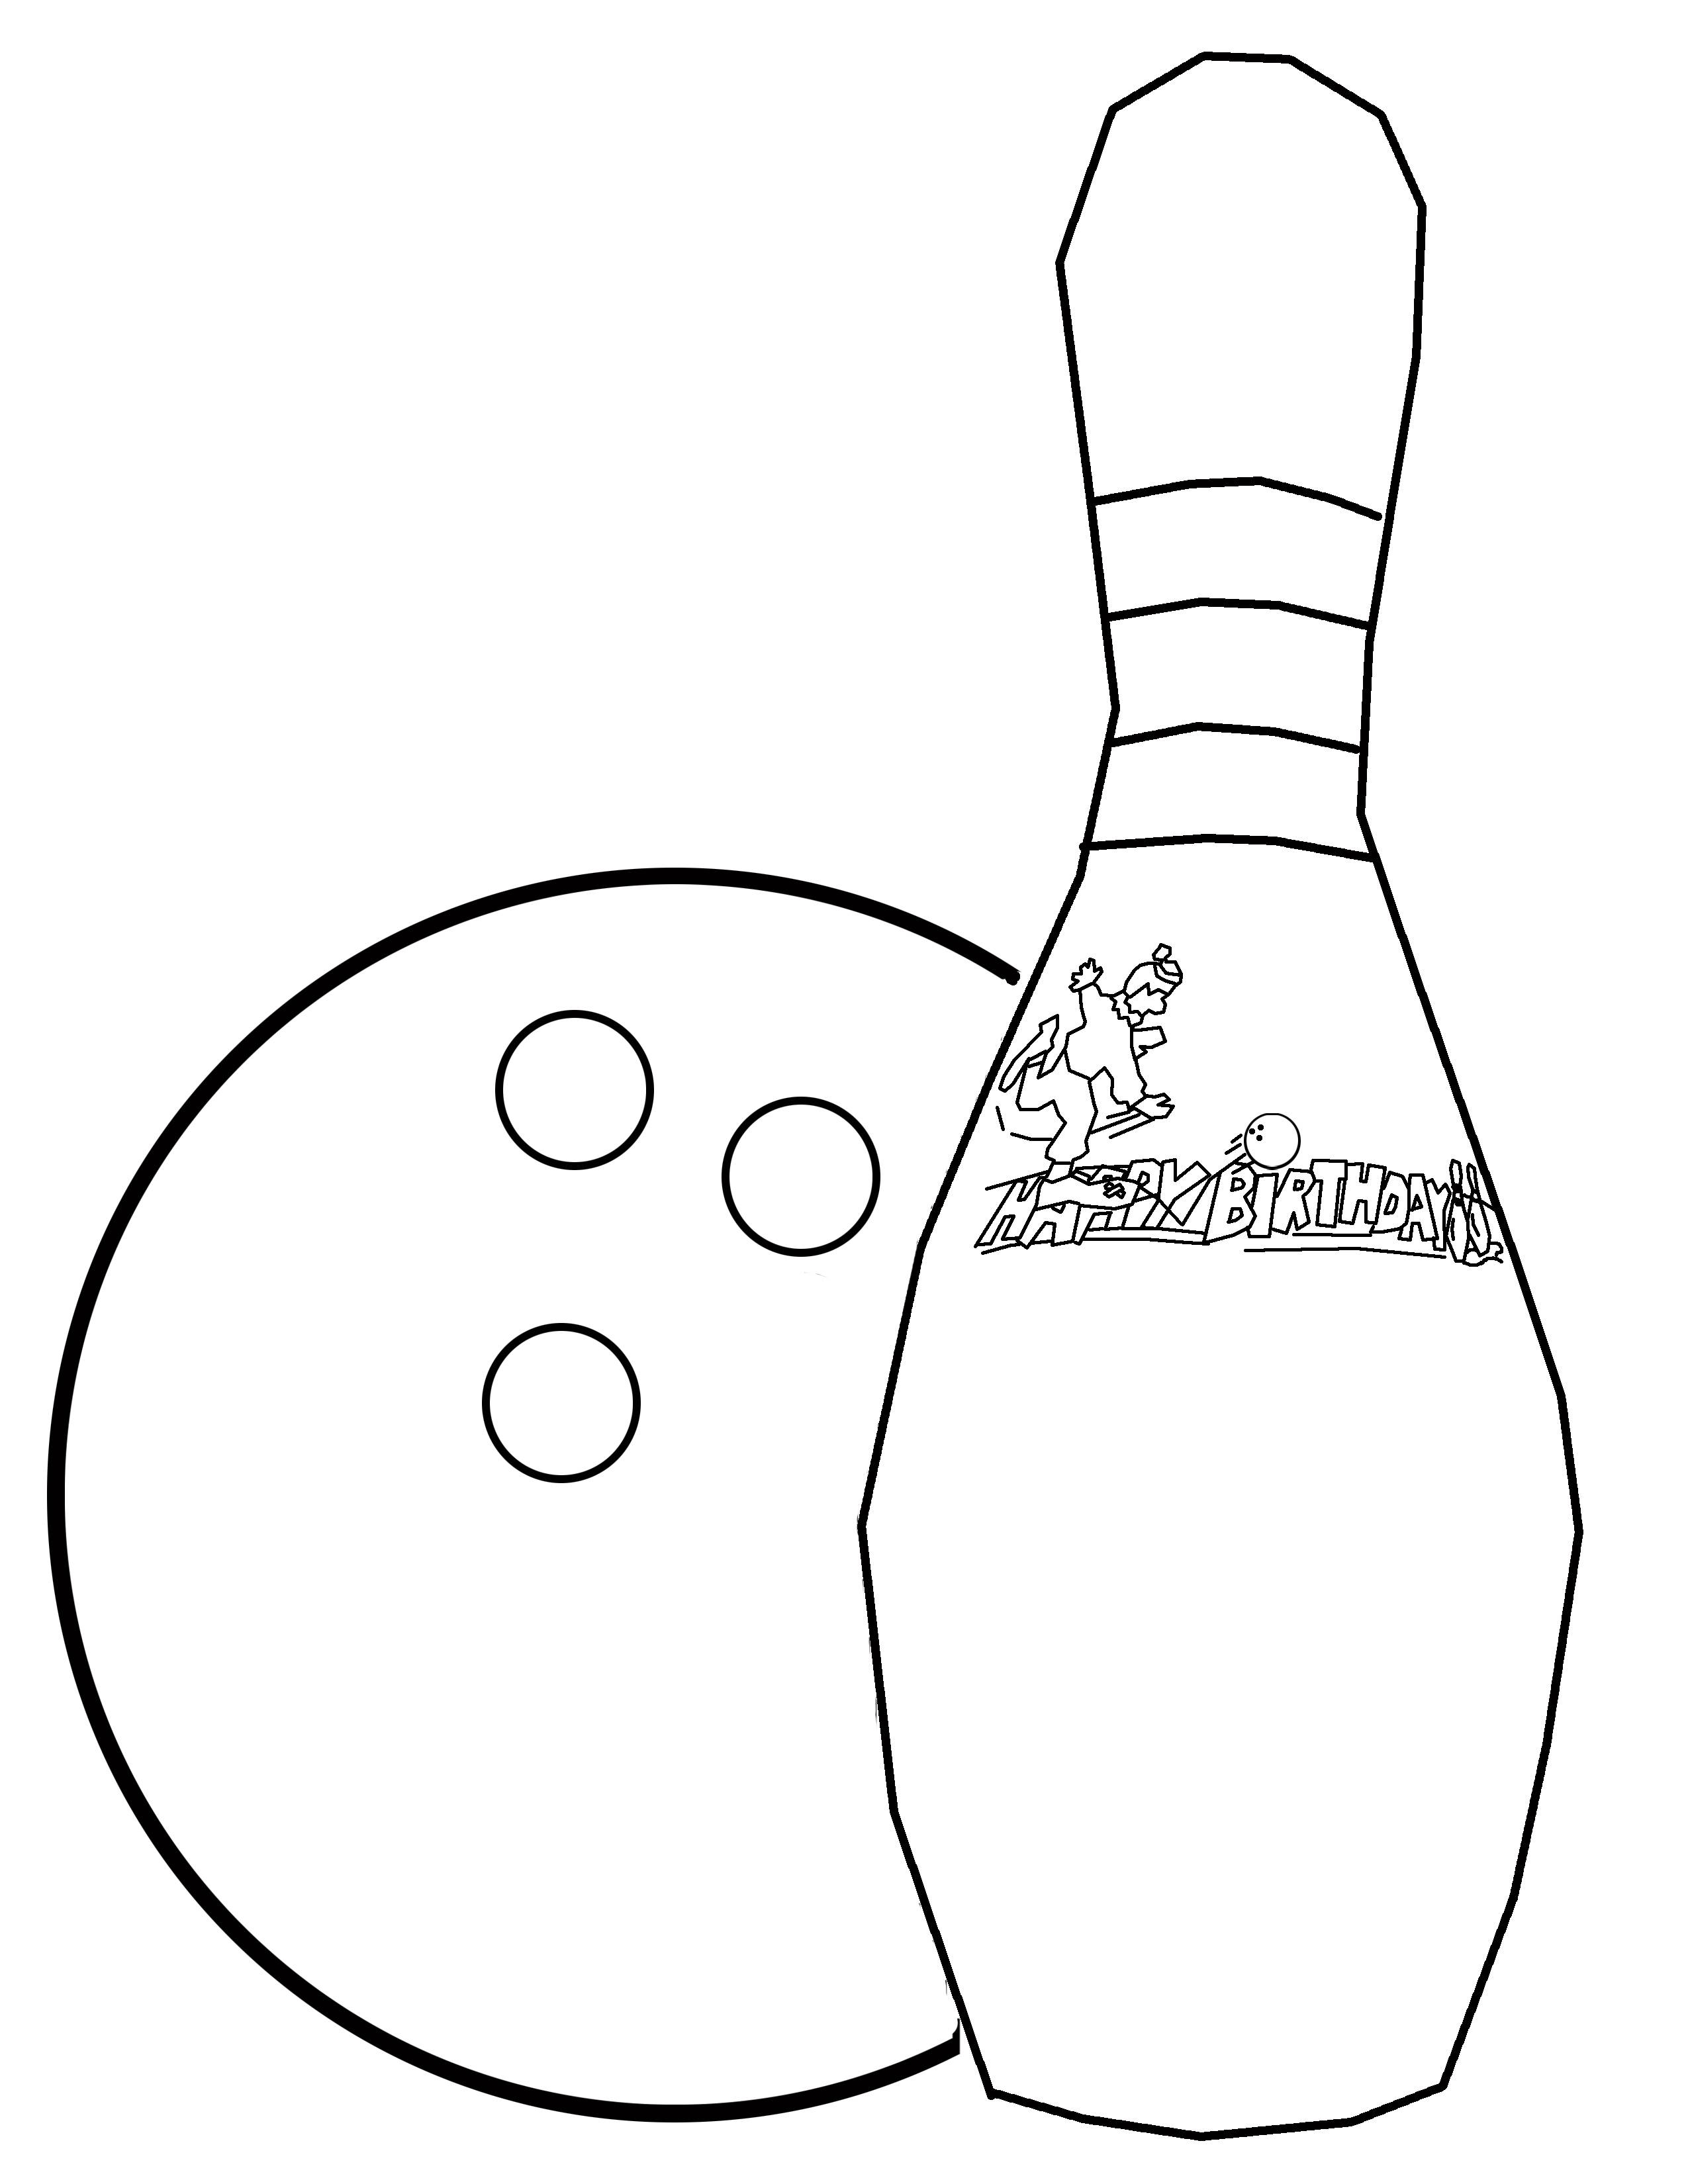 How To Draw A Bowling Pin - Cliparts.co